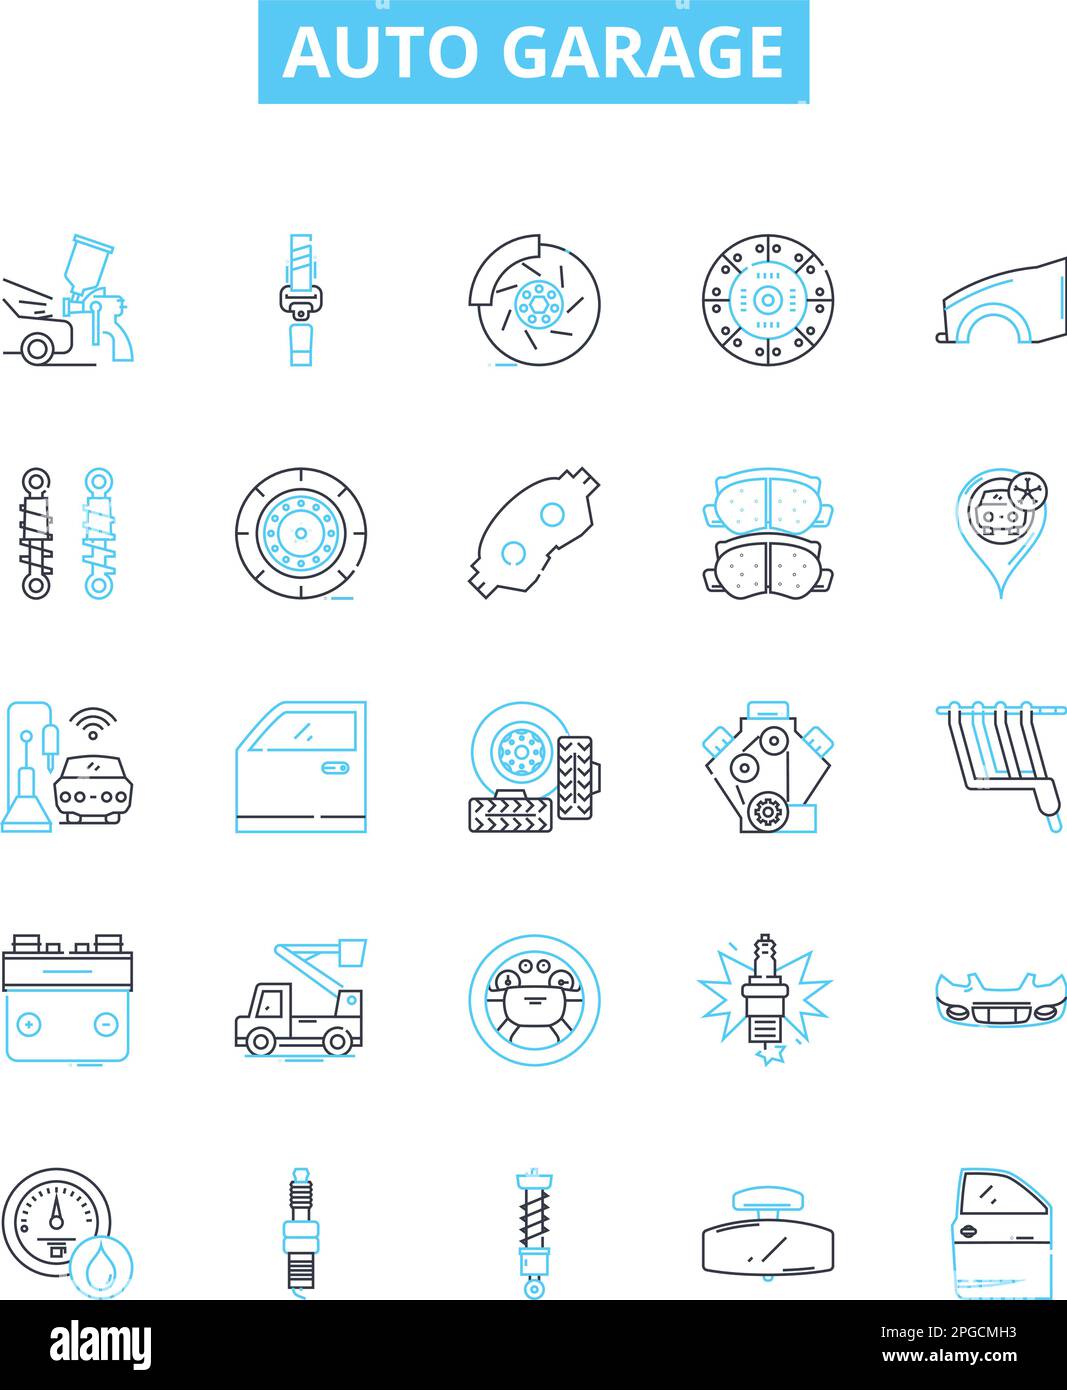 Auto garage vector line icons set. Auto, Garage, Repair, Service, Tune-up, Oil, Change illustration outline concept symbols and signs Stock Vector